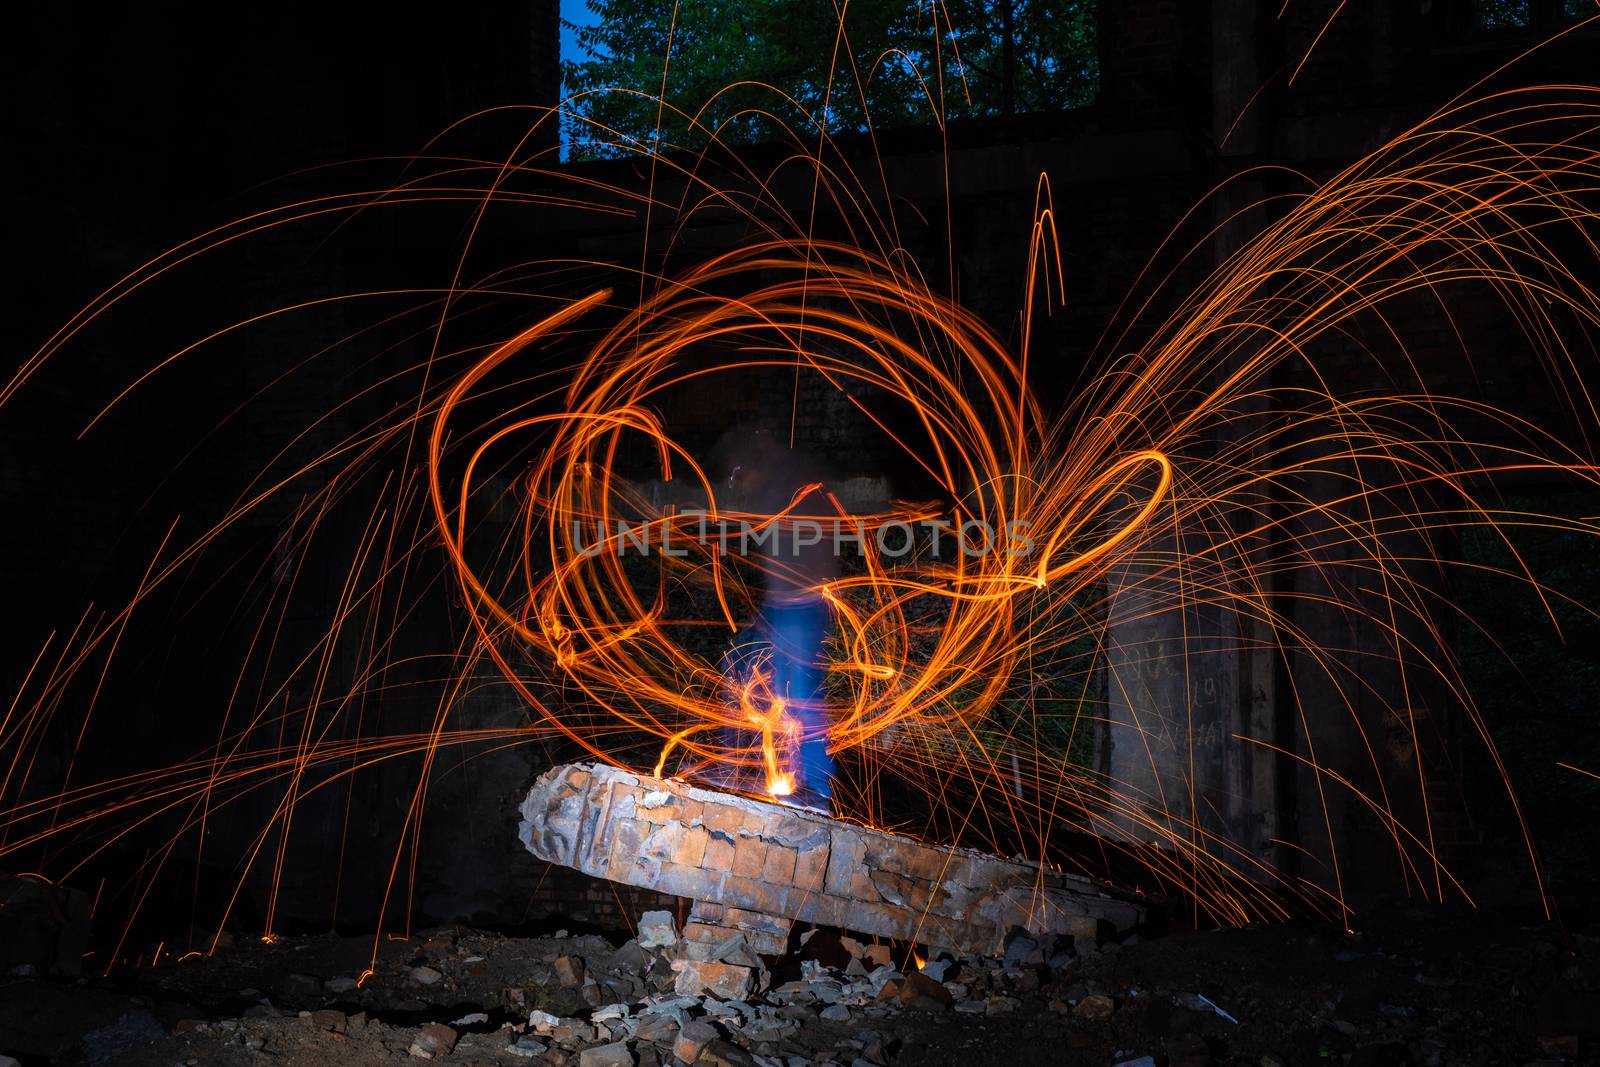 Drawing light at night in an old abandoned building, splashes of light and sparks. Freezelight